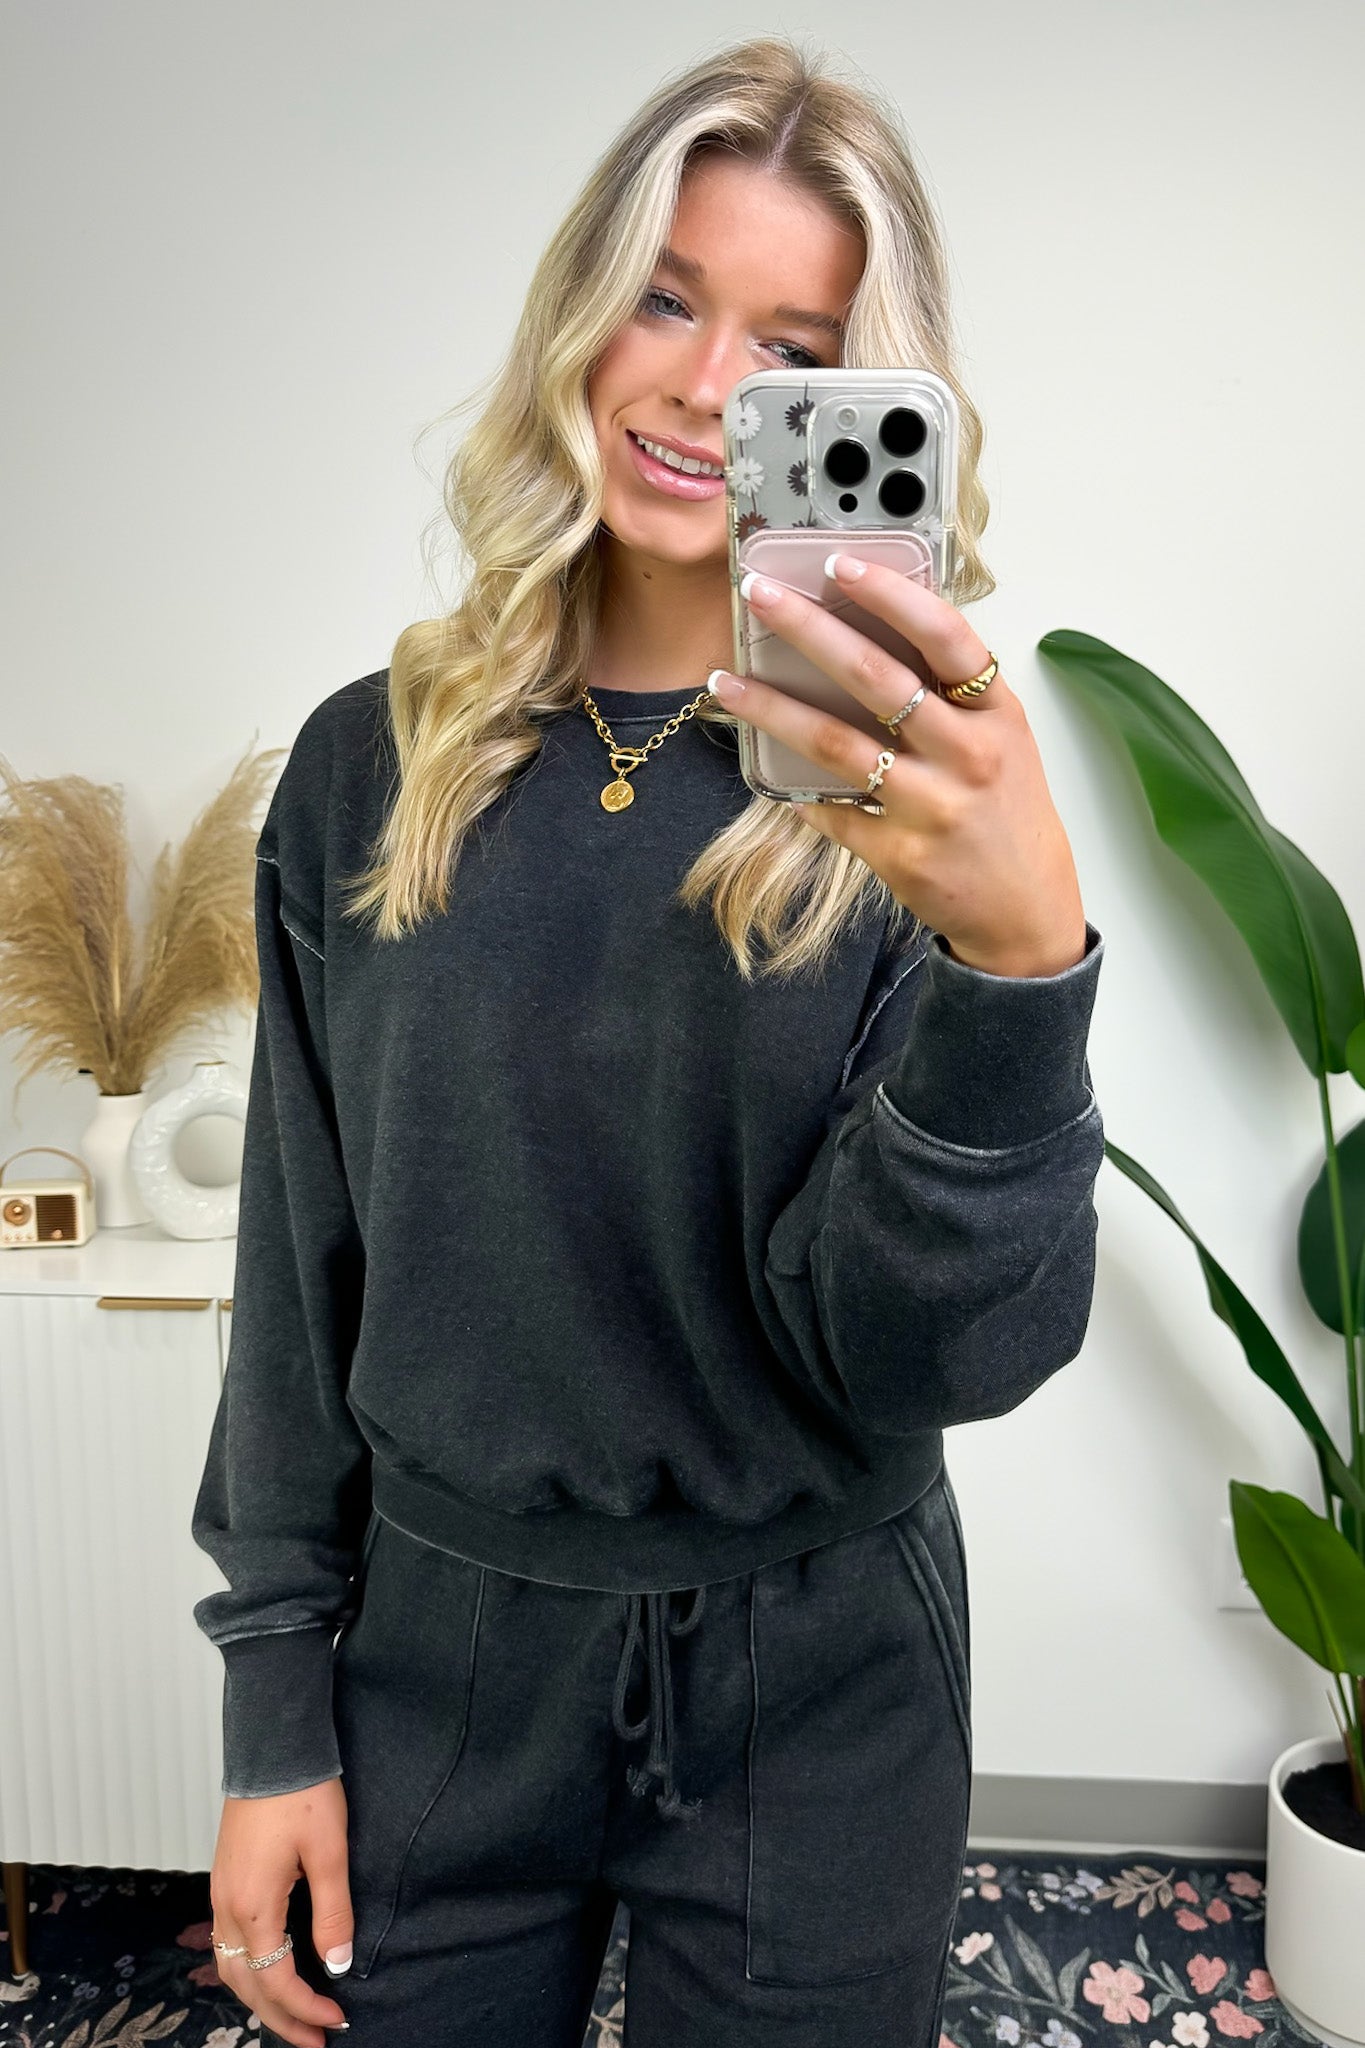  Rest Day Exposed Seam Sweatshirt - Madison and Mallory